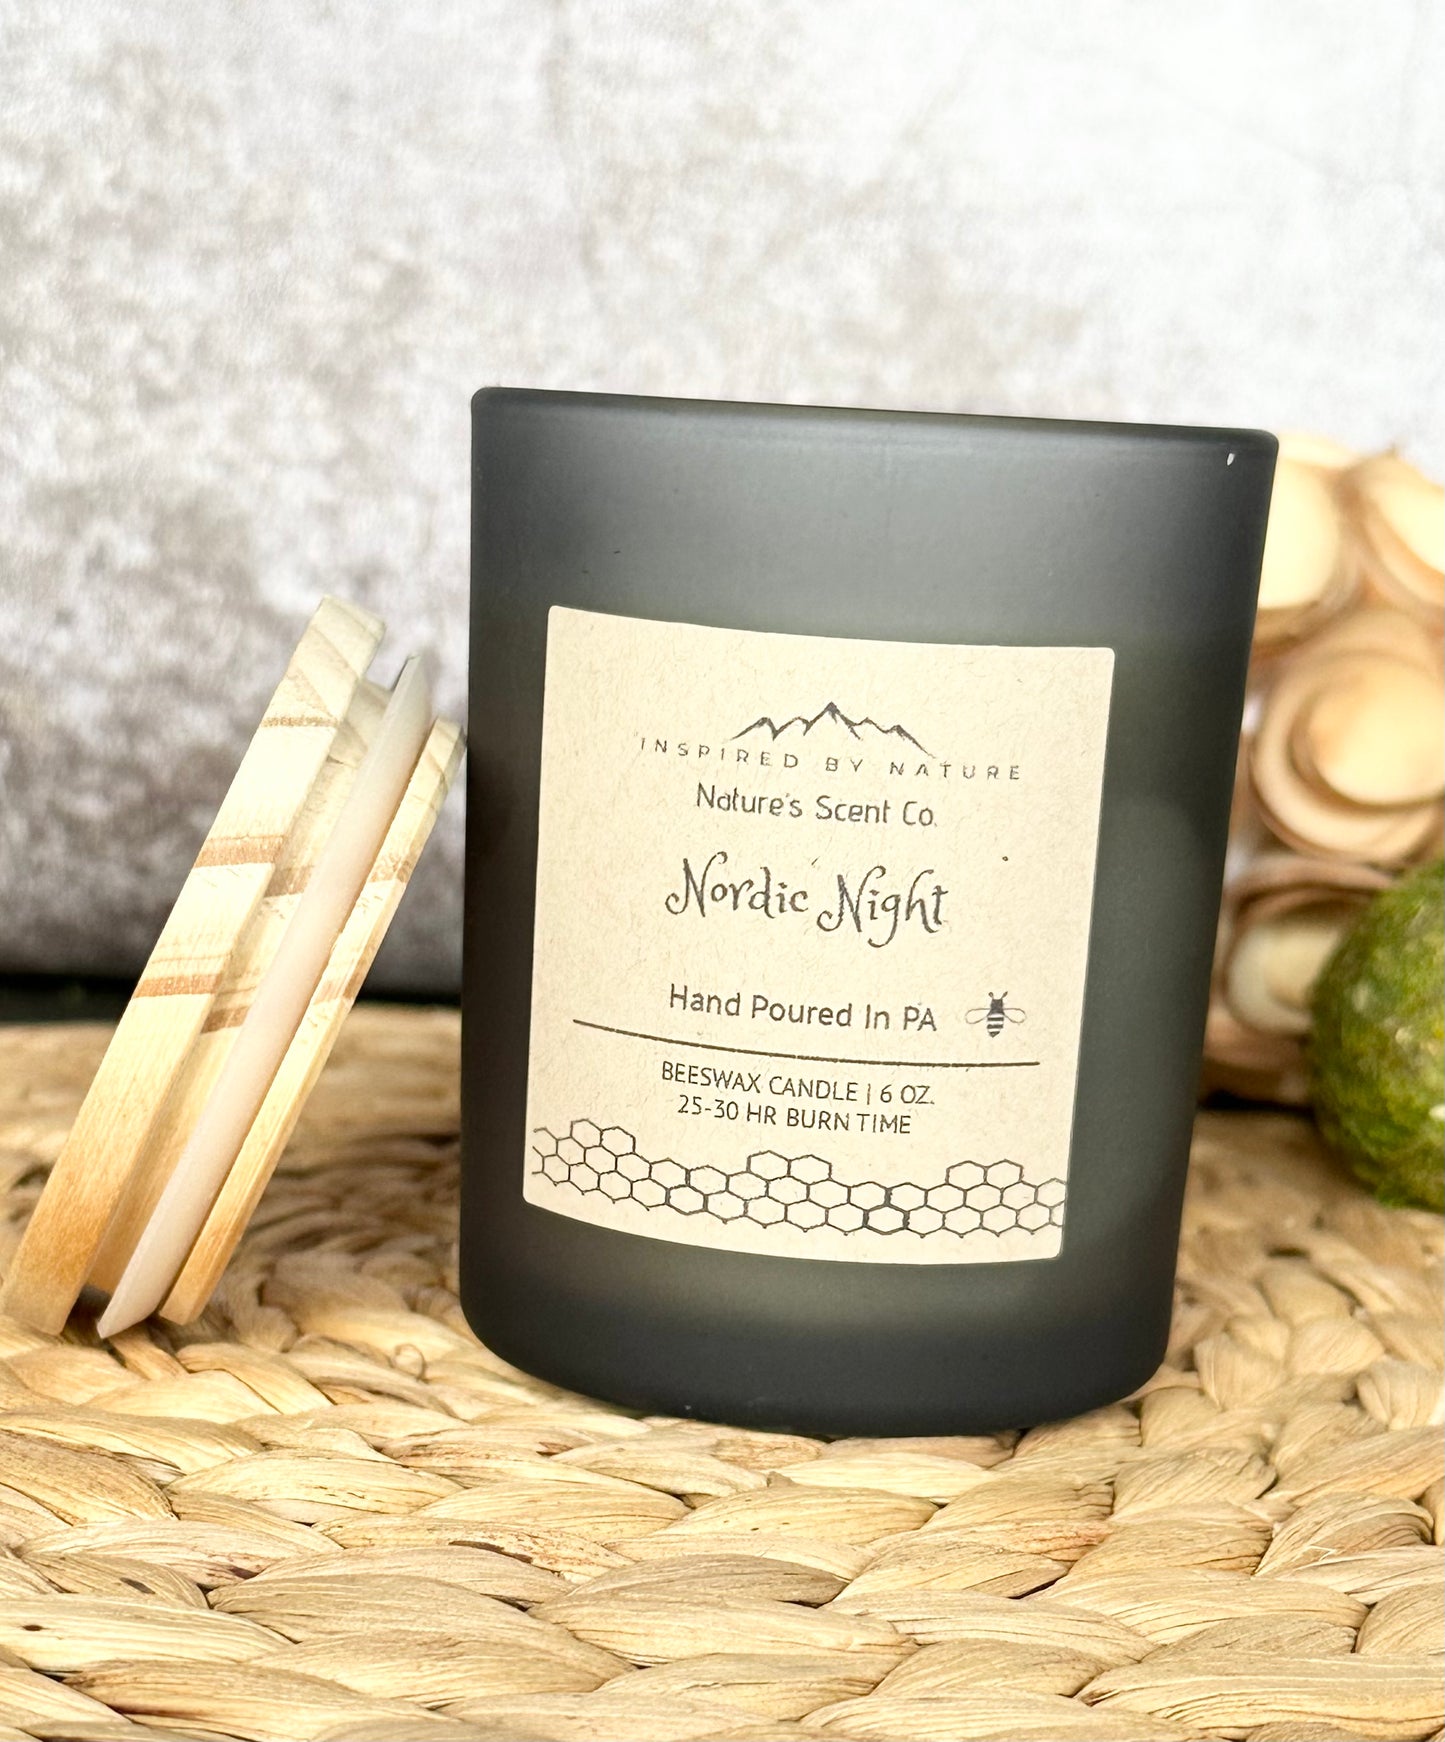 Nordic Night Beeswax Candle